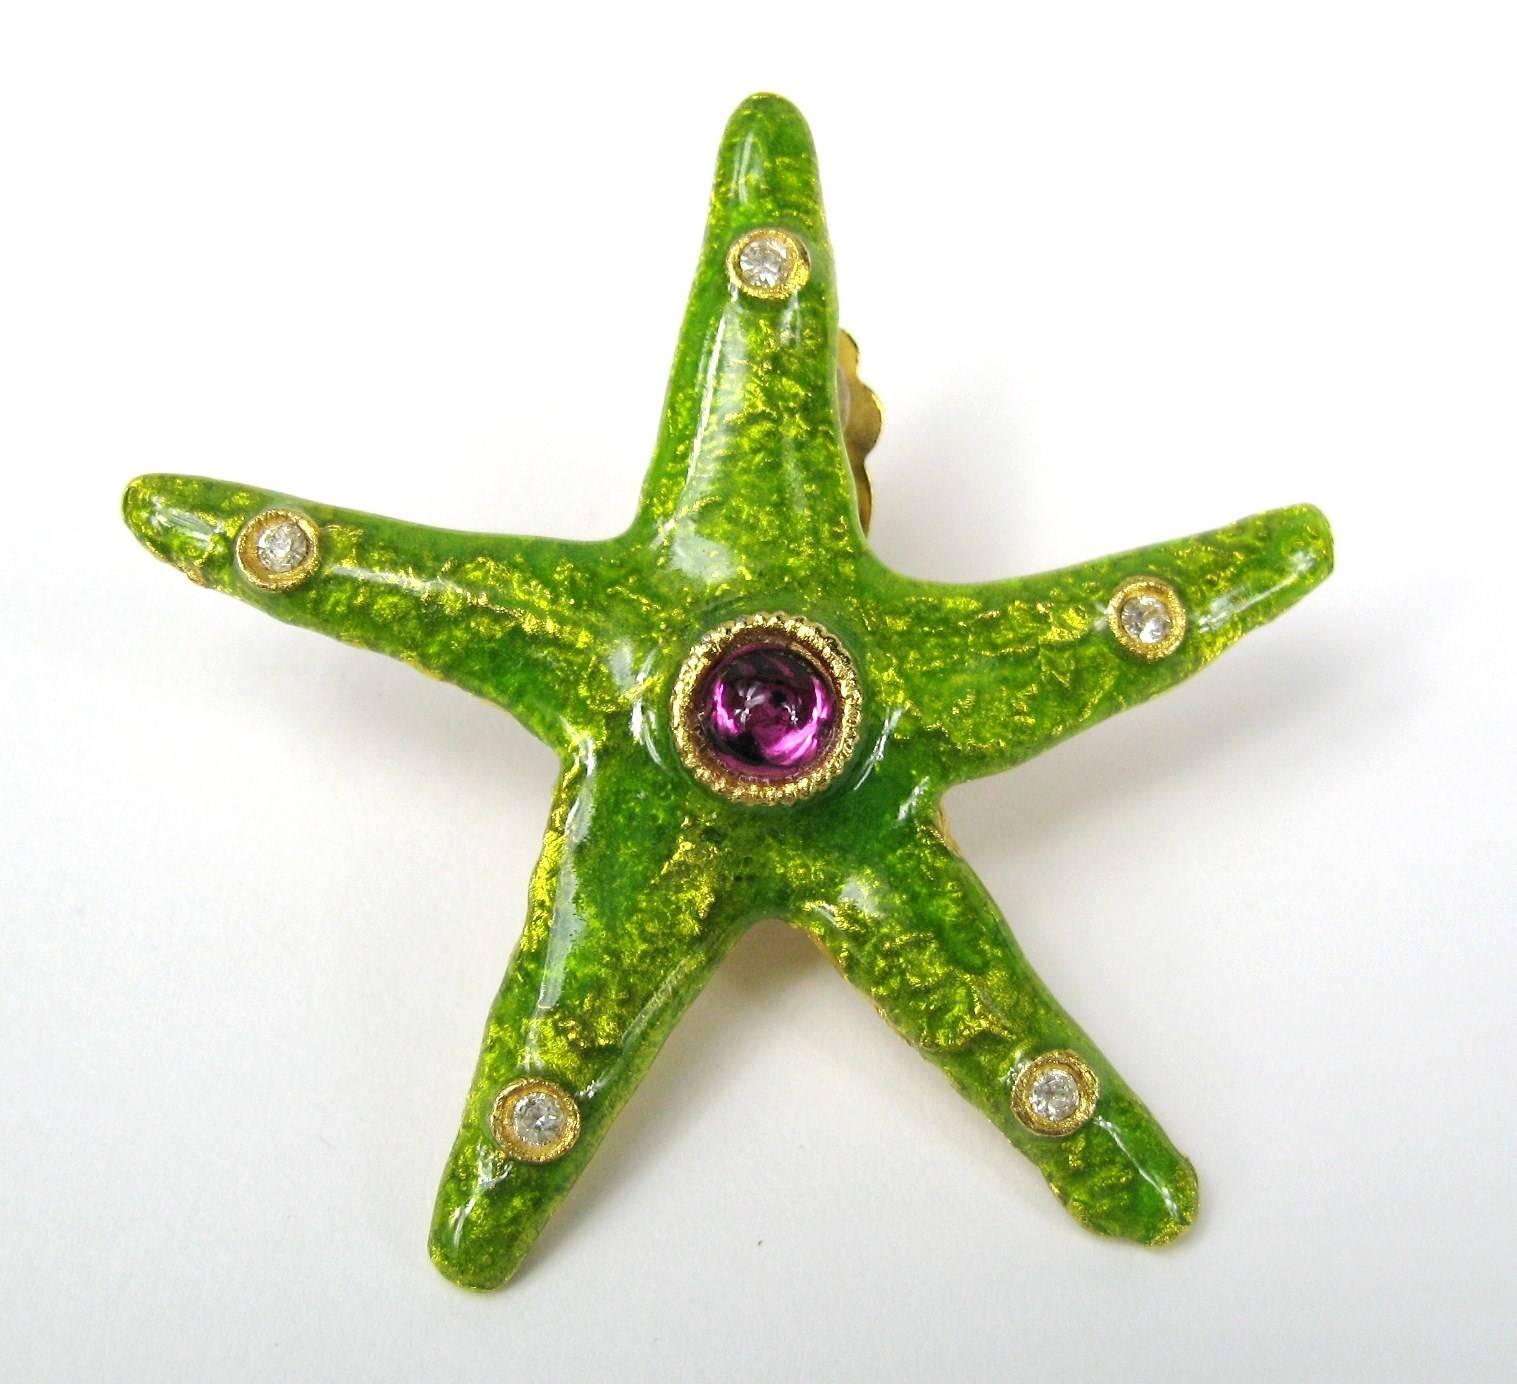 Yosca Green enameled Starfish earrings circa the 1980s Measuring 2.29, nice size will make a statement. This is out of a massive collection of New Old stock items as well as  Hopi, Zuni, Navajo, Southwestern, sterling silver, (costume jewelry that